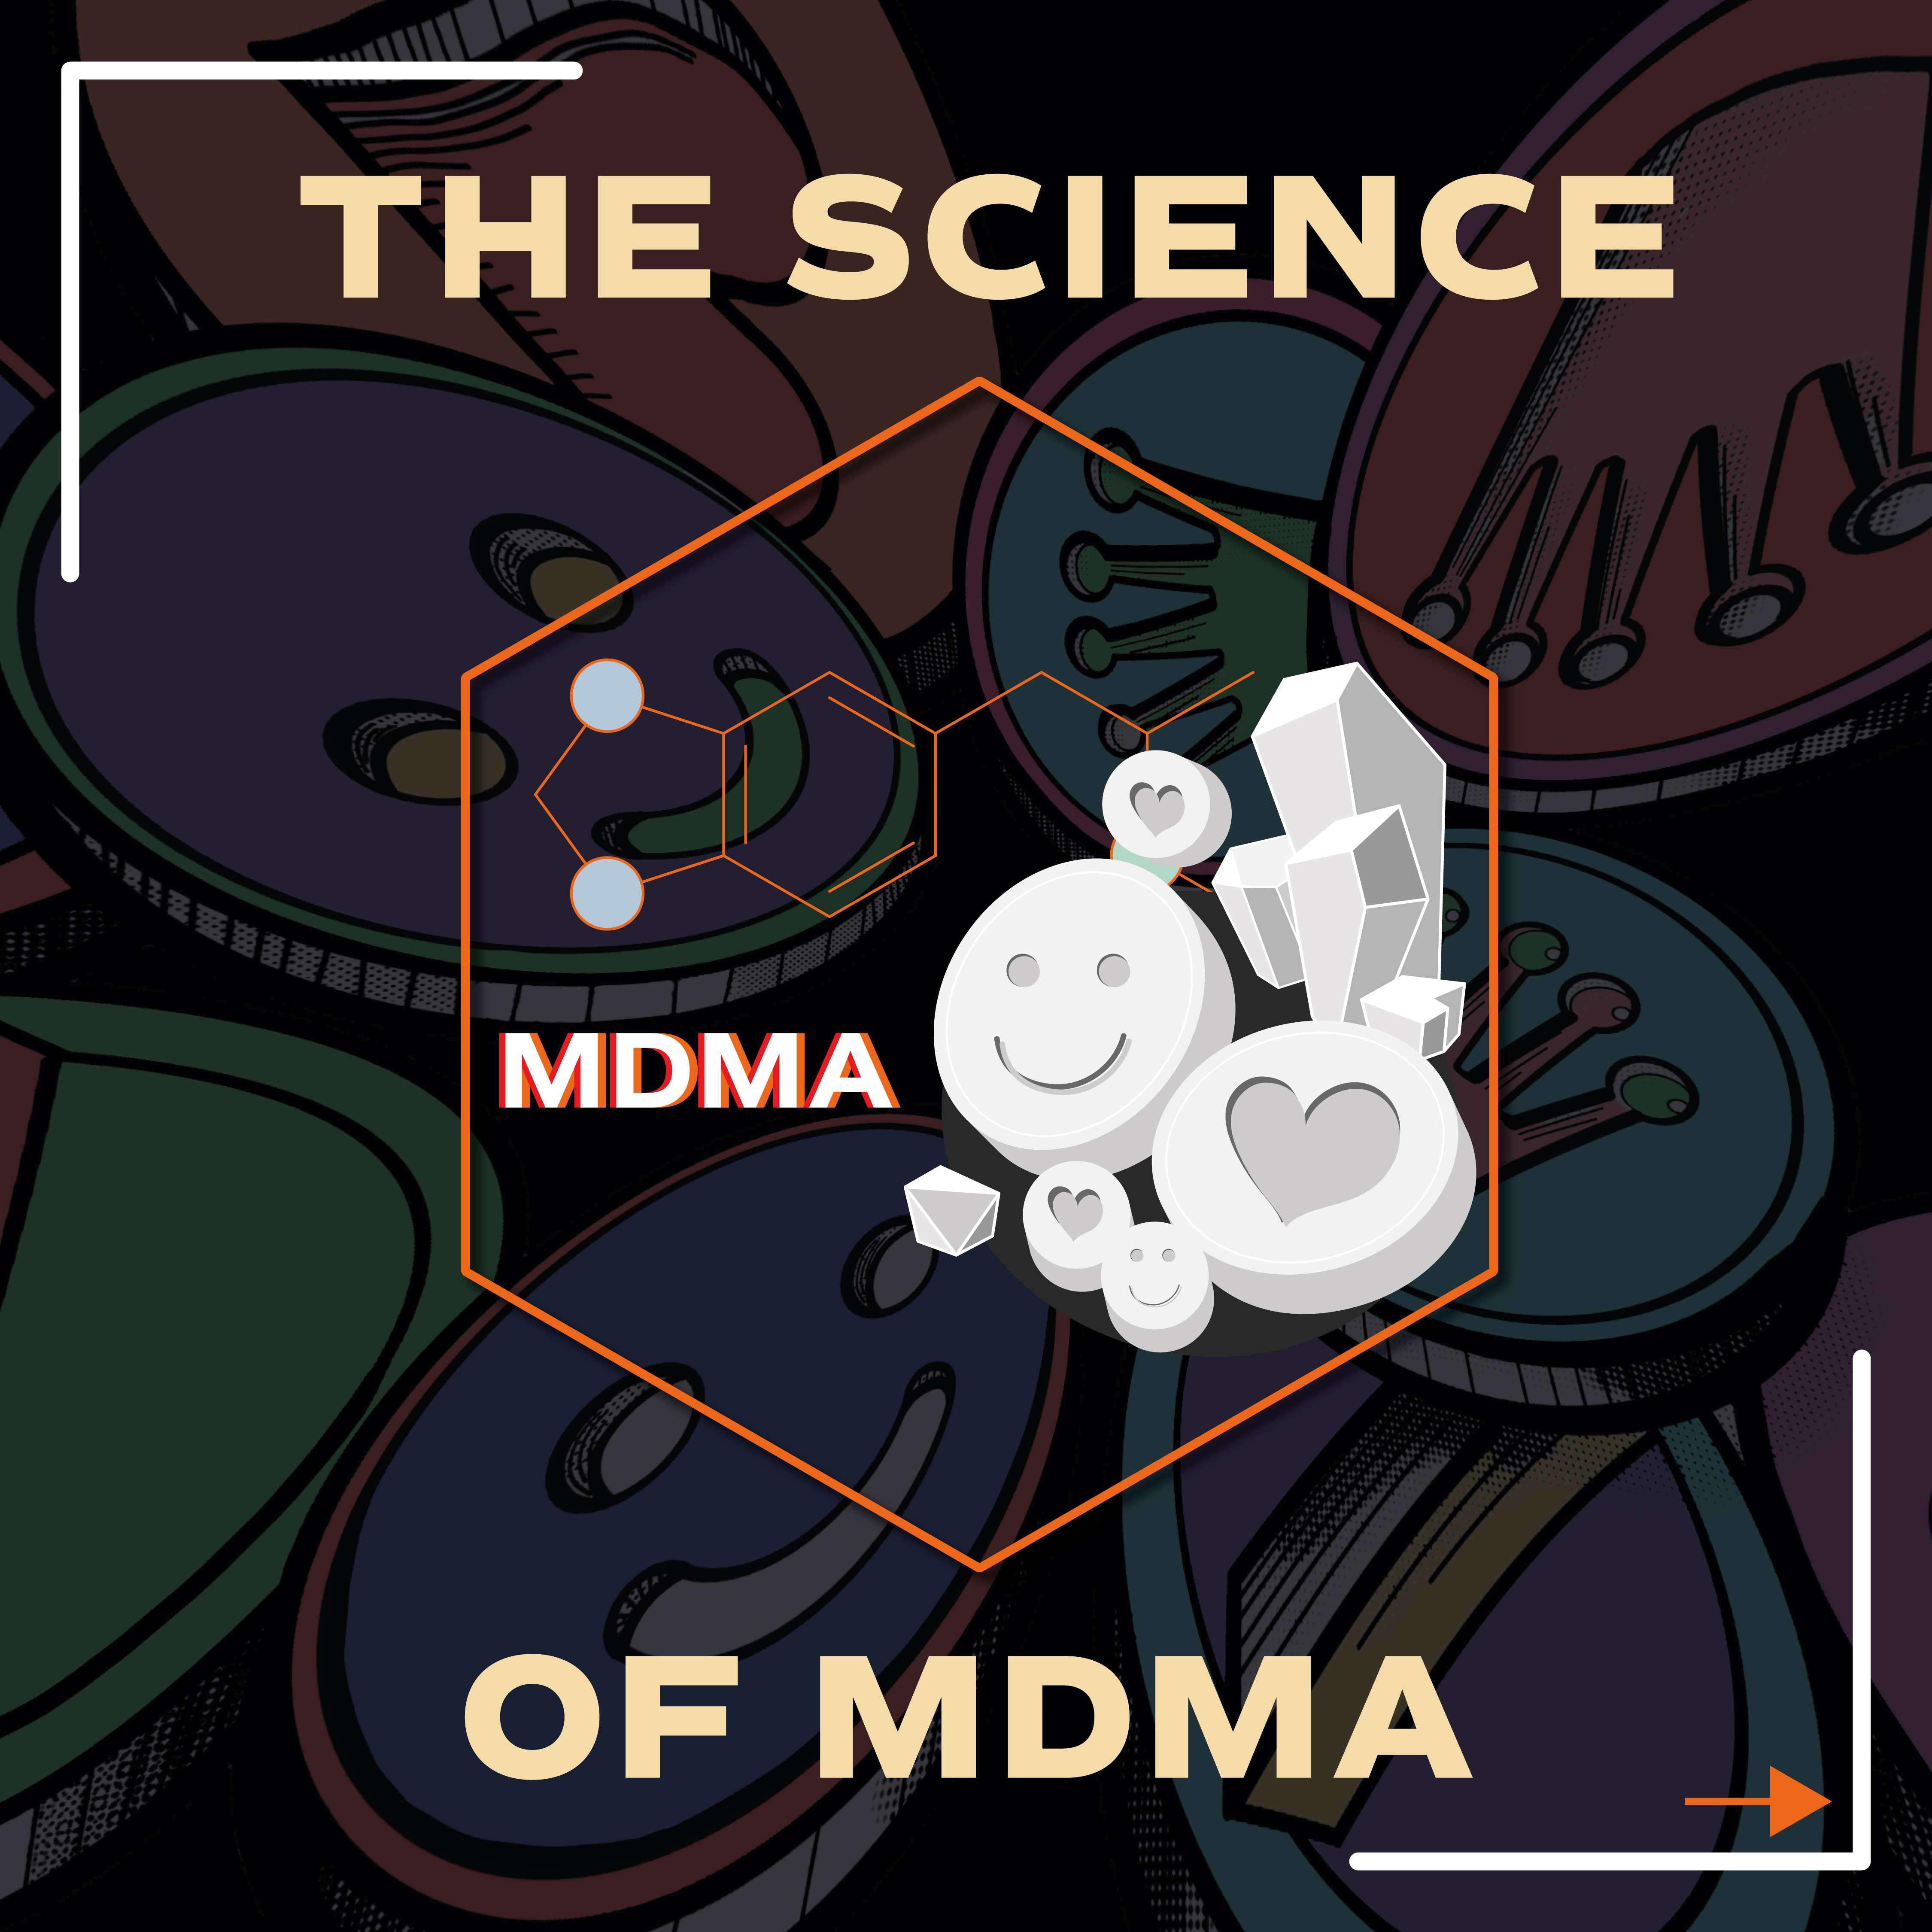 The Science of MDMA